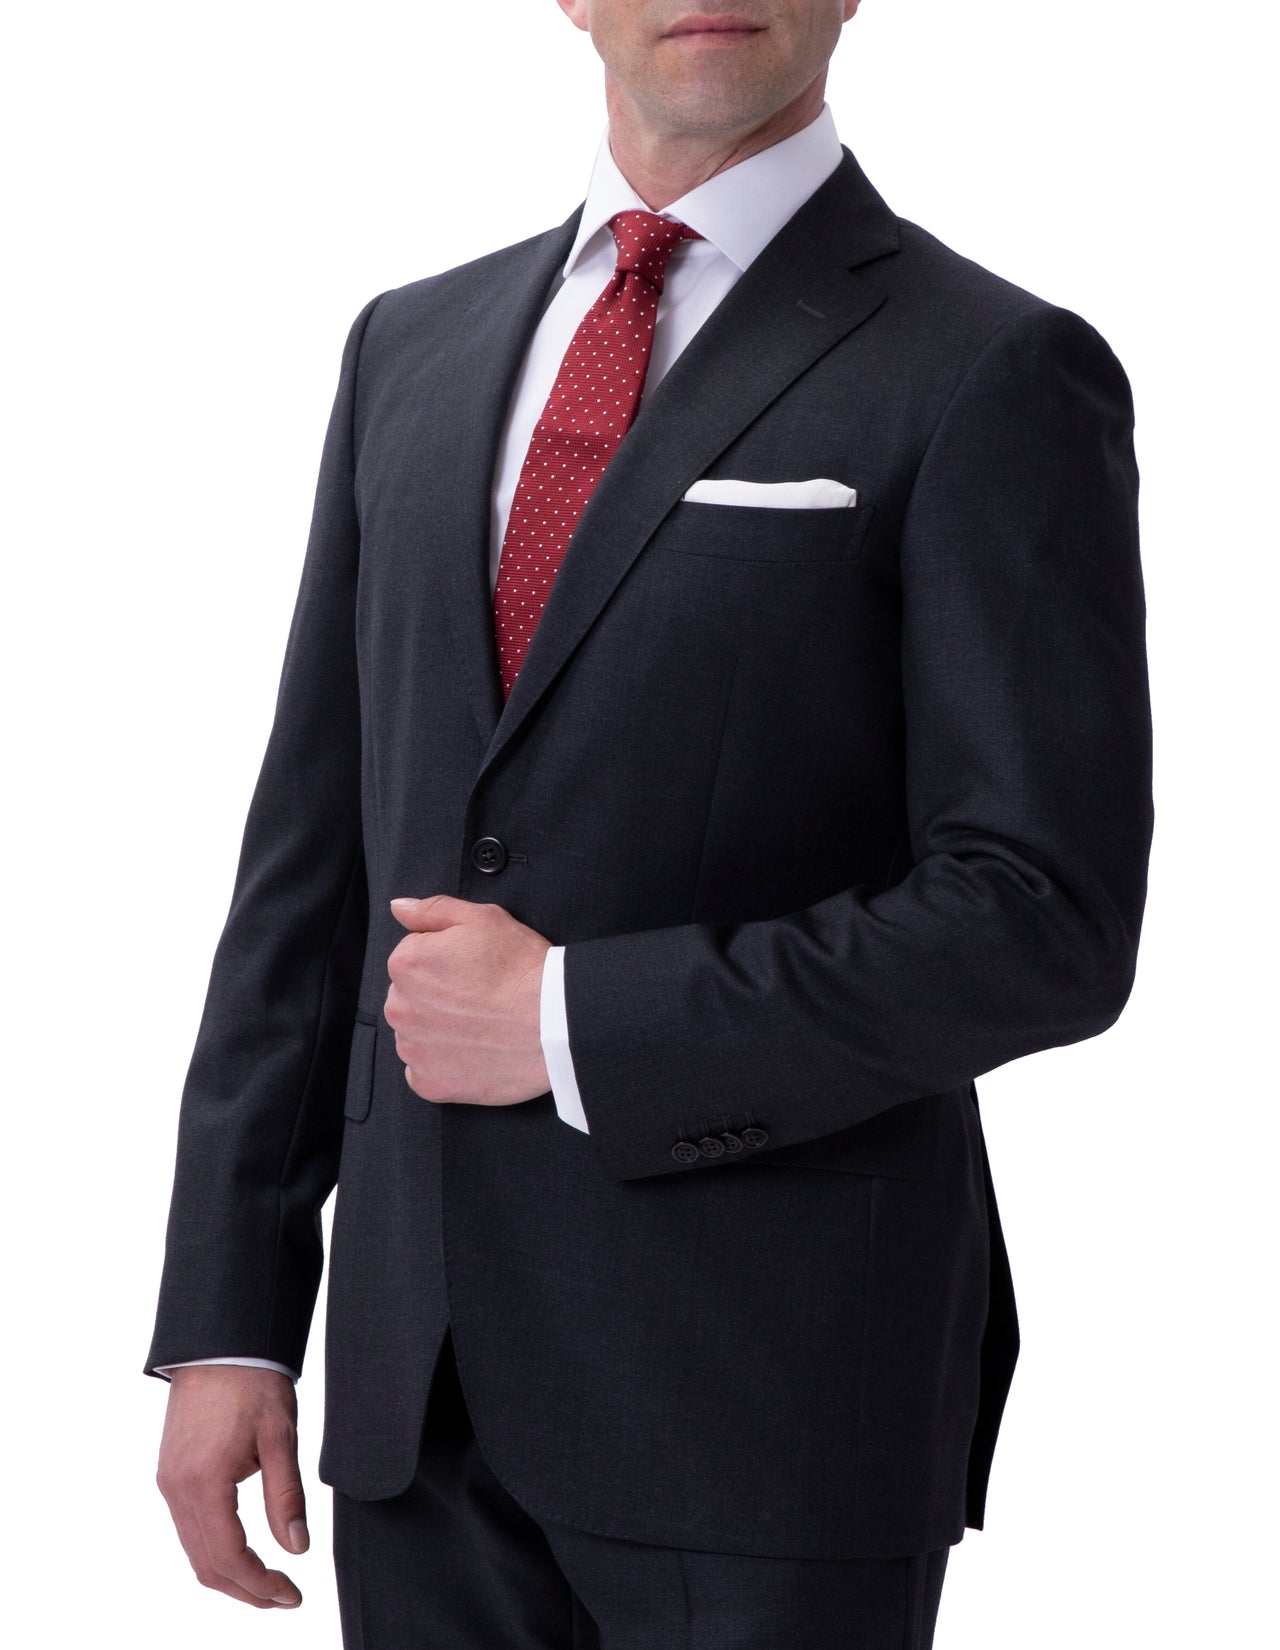 HENRY SARTORIAL Twill Suit CHARCOAL LG